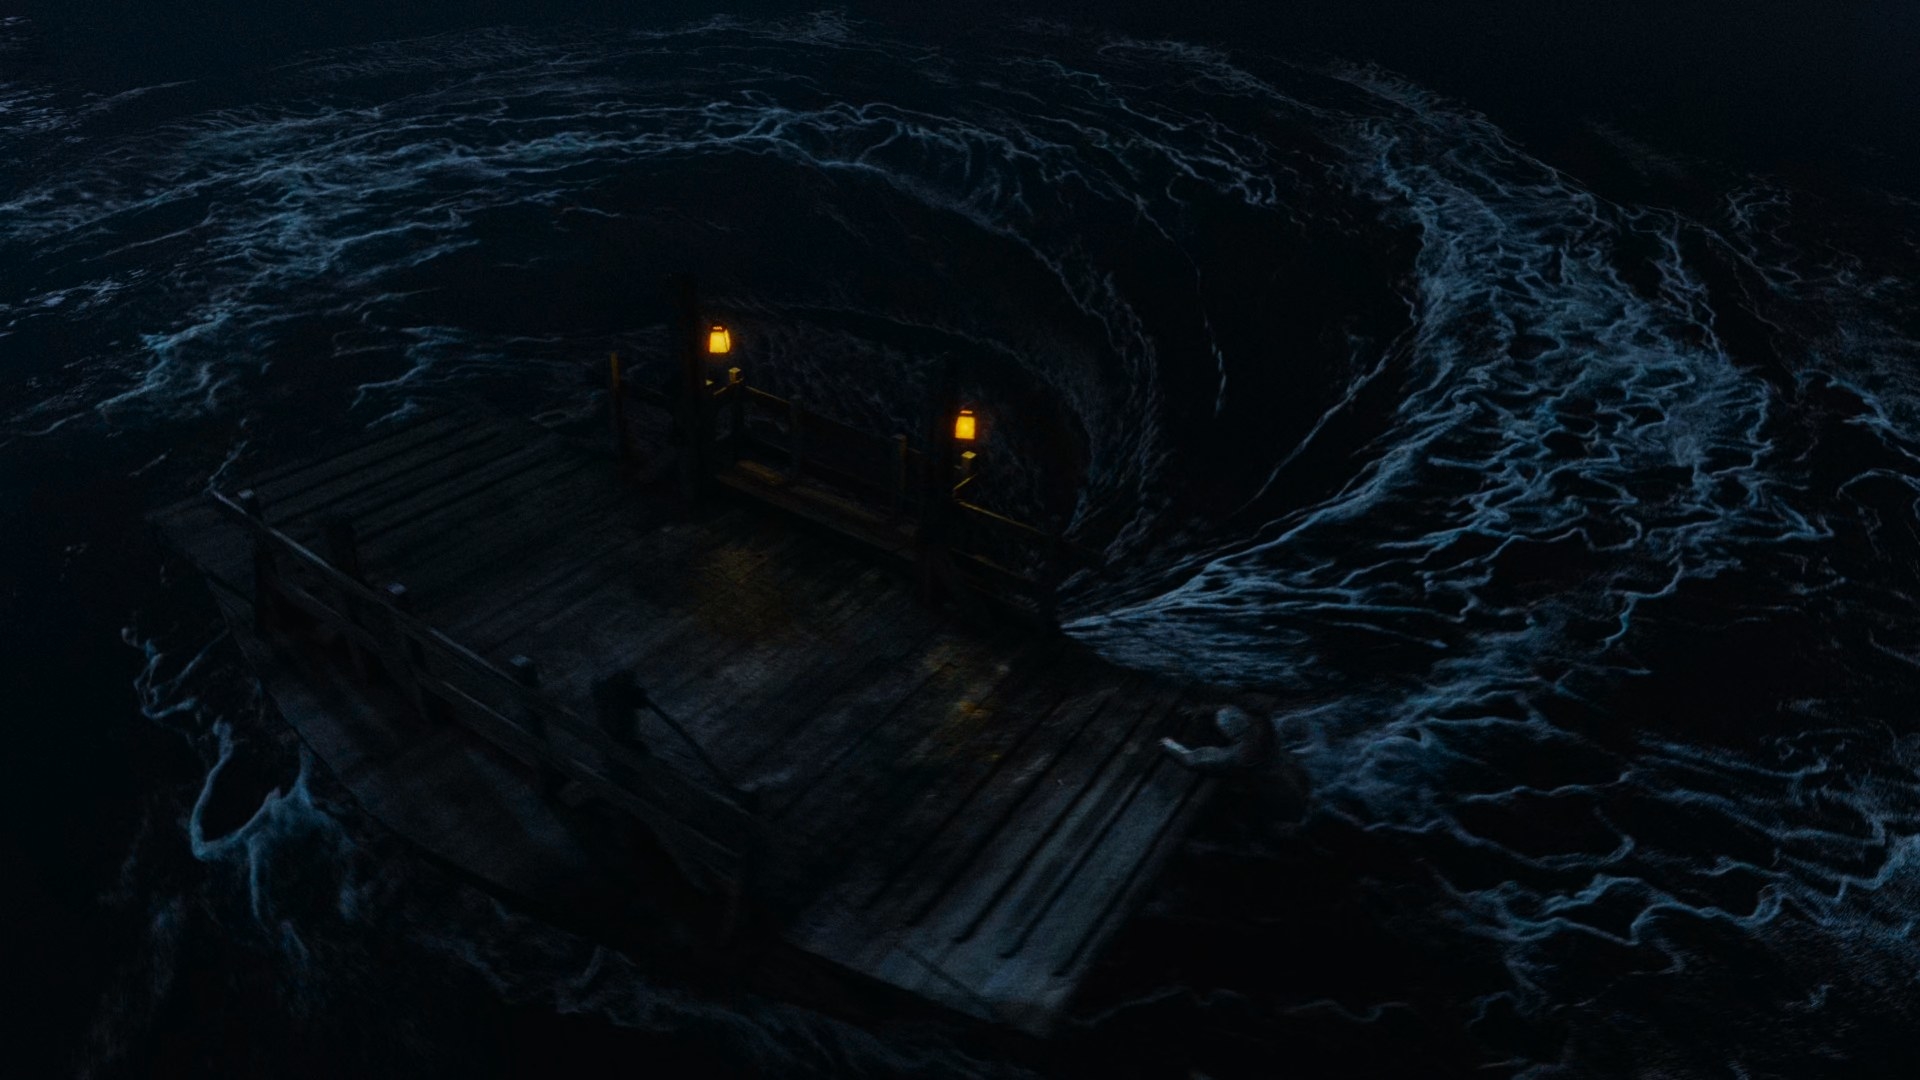 An overhead shot of a giant whirlpool, about to swallow up the Taren ferry, with the diminutive form of Master Hightower struggling to climb aboard